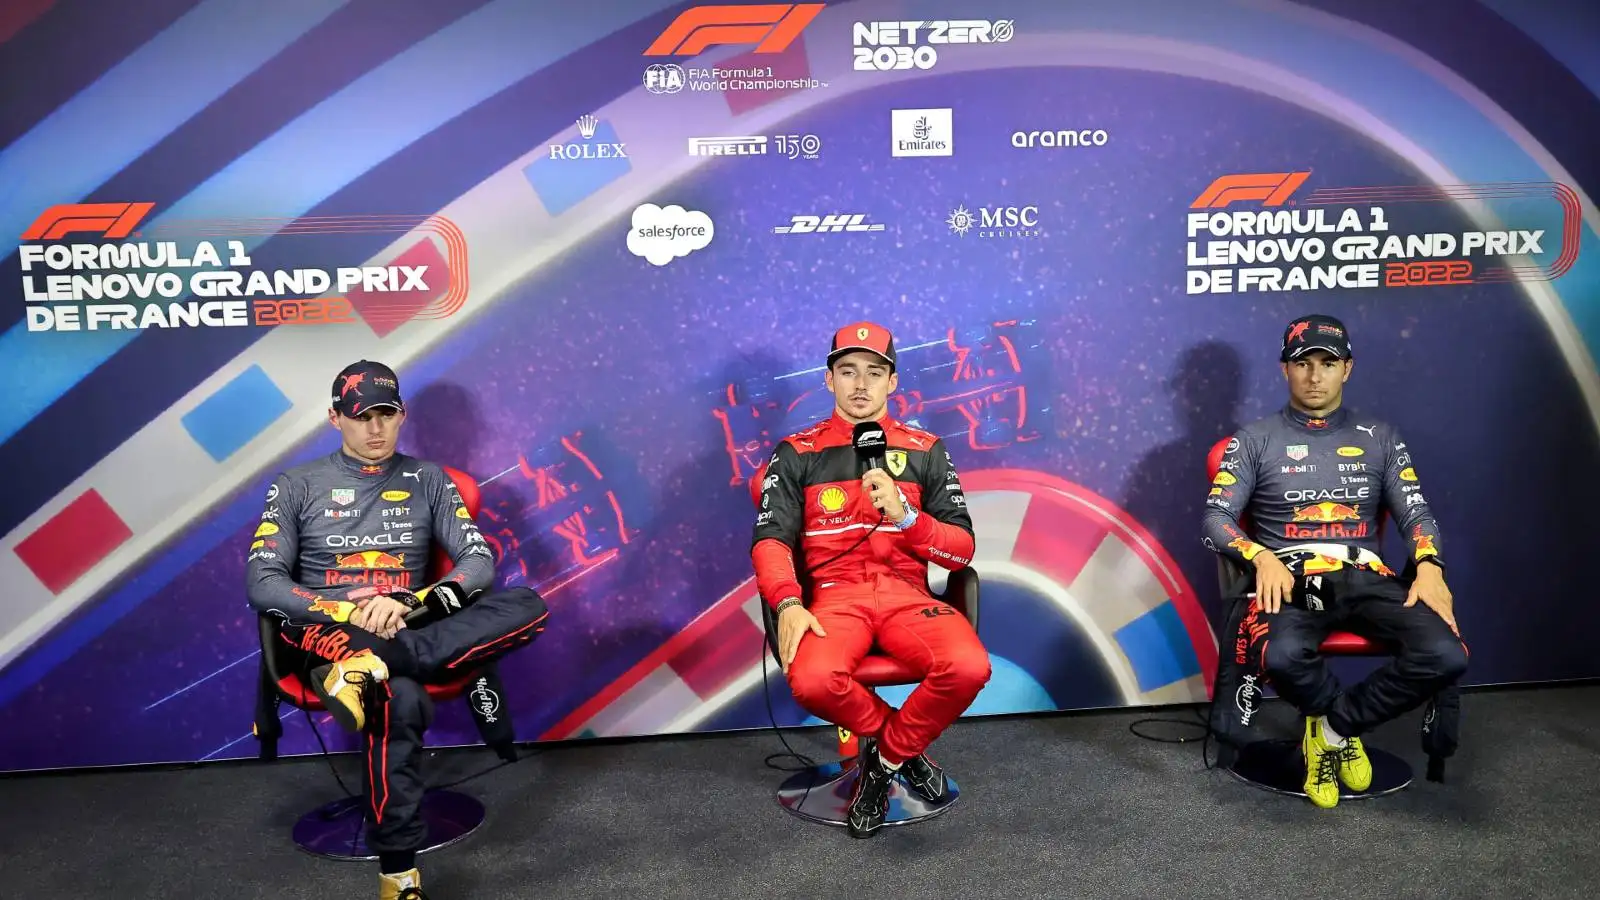 Charles Leclerc, Max Verstappen and Sergio Perez at the French GP qualifying press conference. Paul Ricard July 2022.